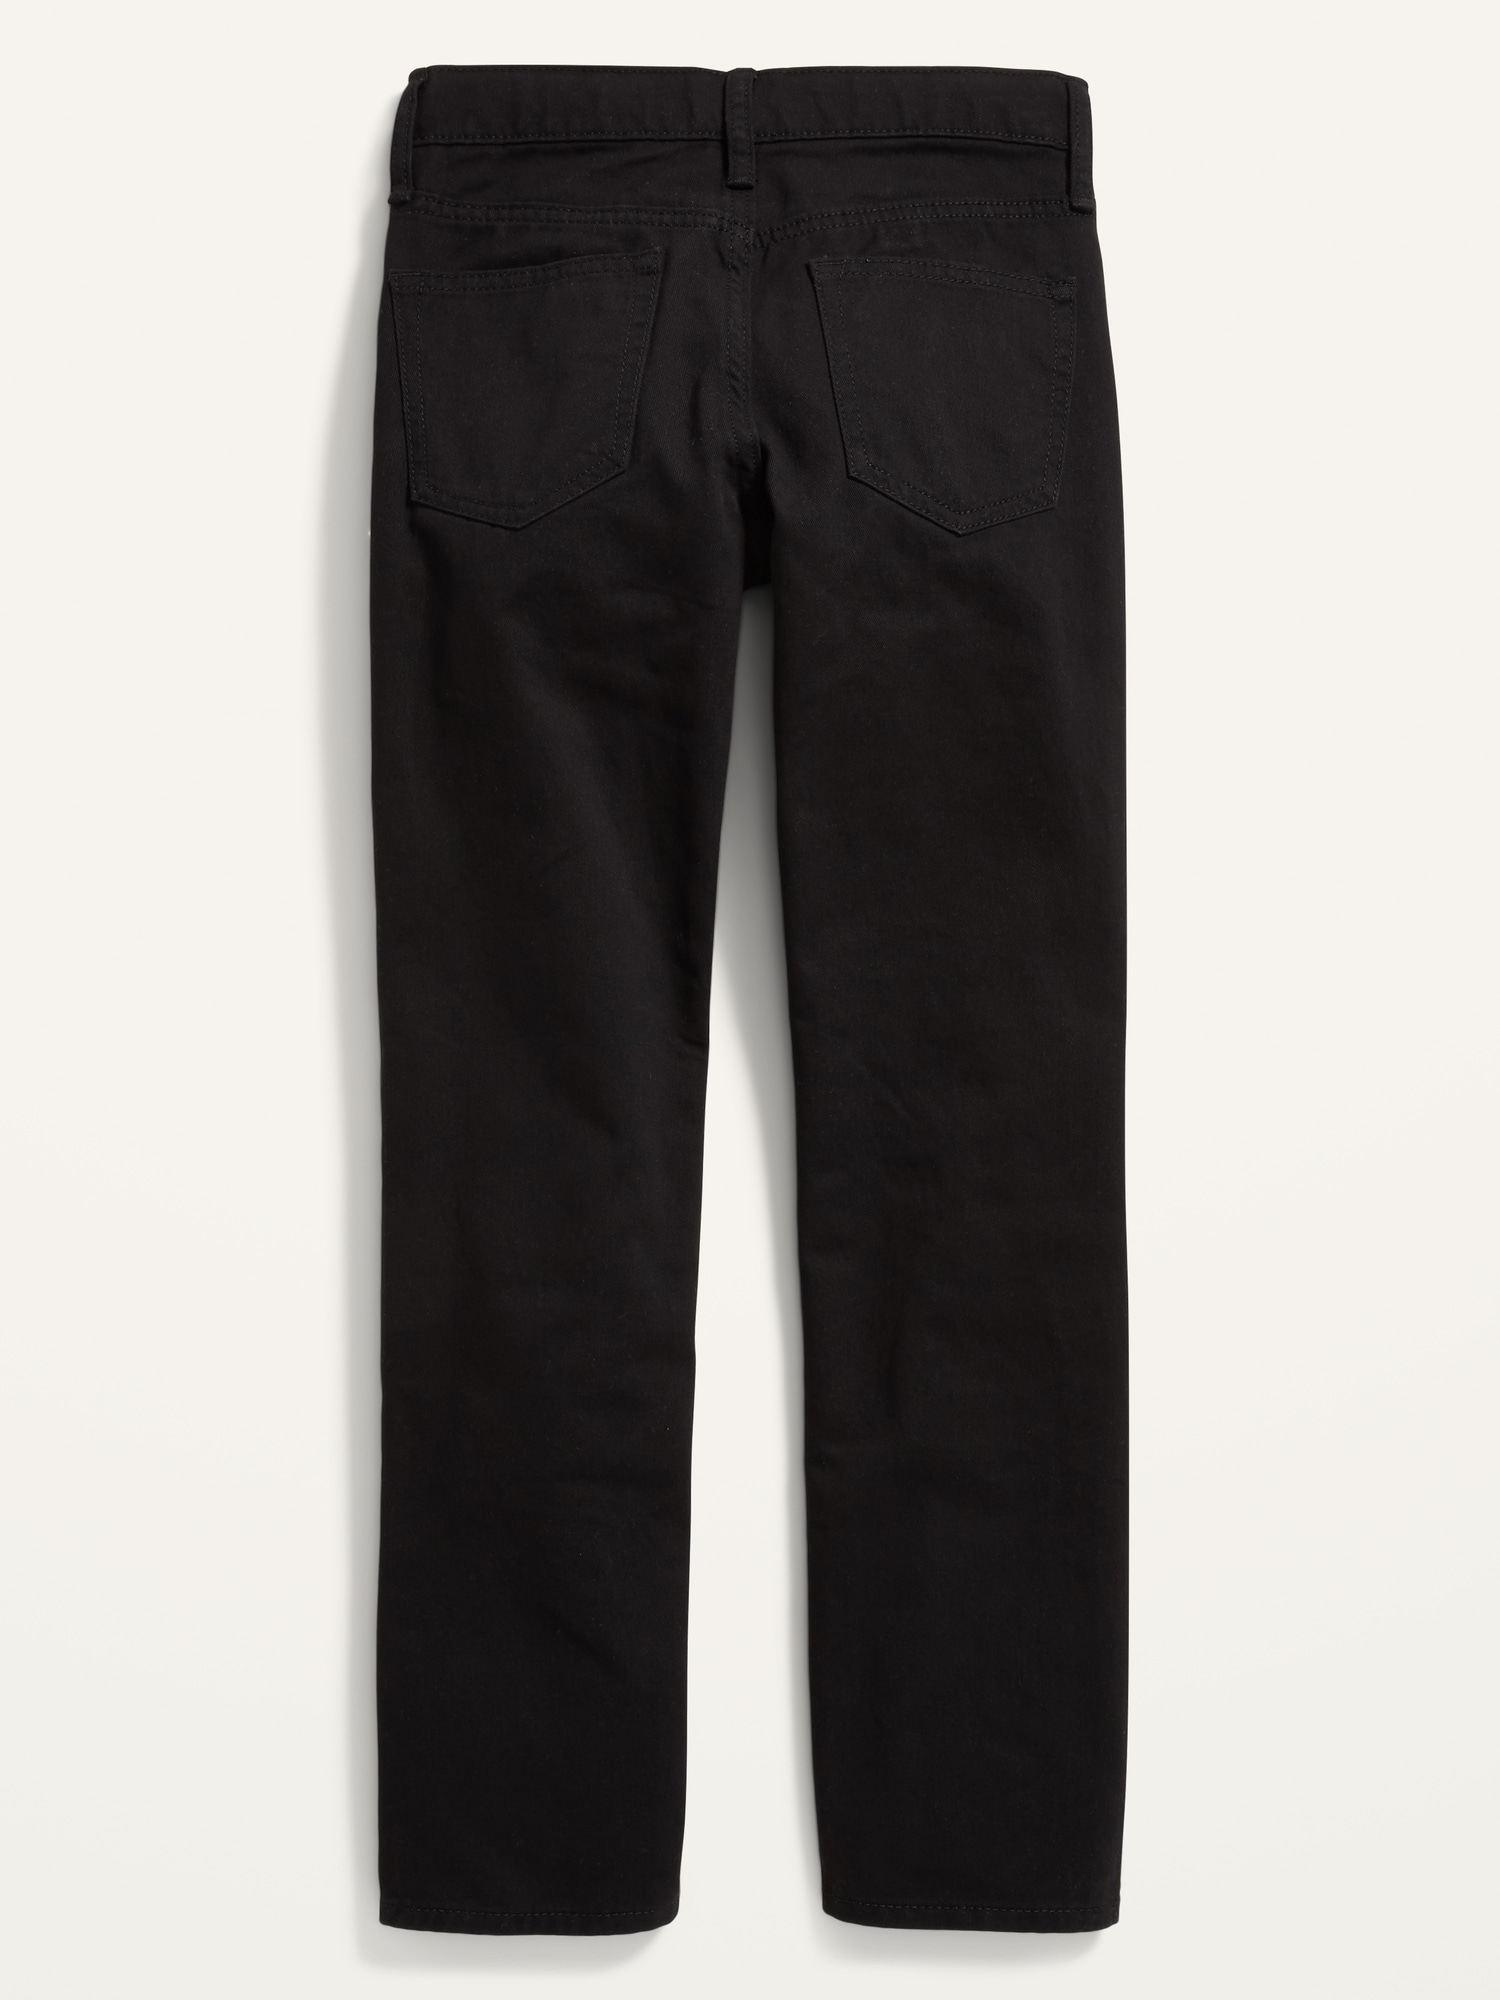 Skinny Non-Stretch Black Jeans for Boys | Old Navy